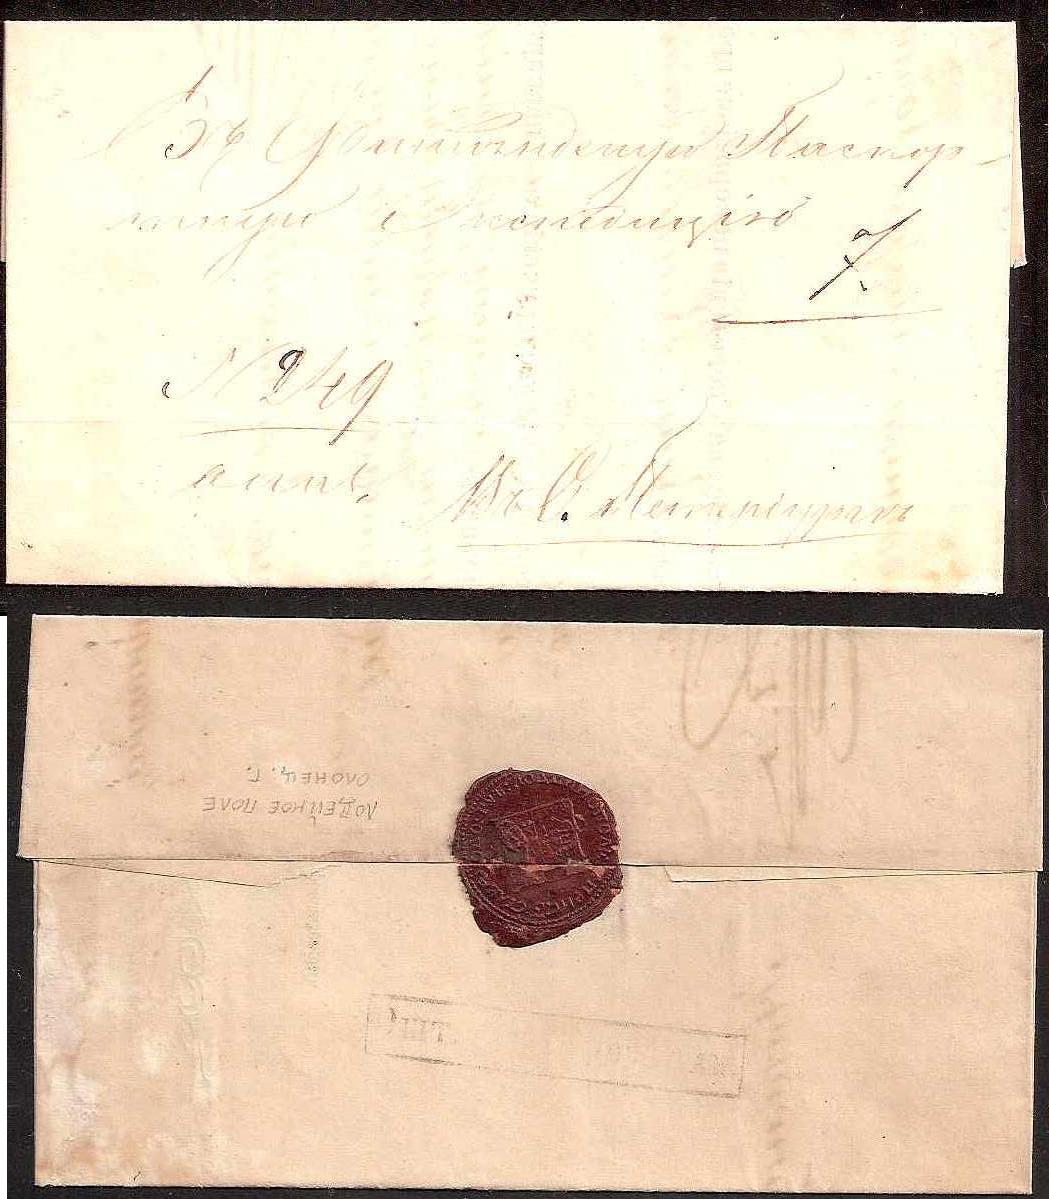 Russia Postal History - Stampless Covers Lodejnoye Pole Scott 1541860 